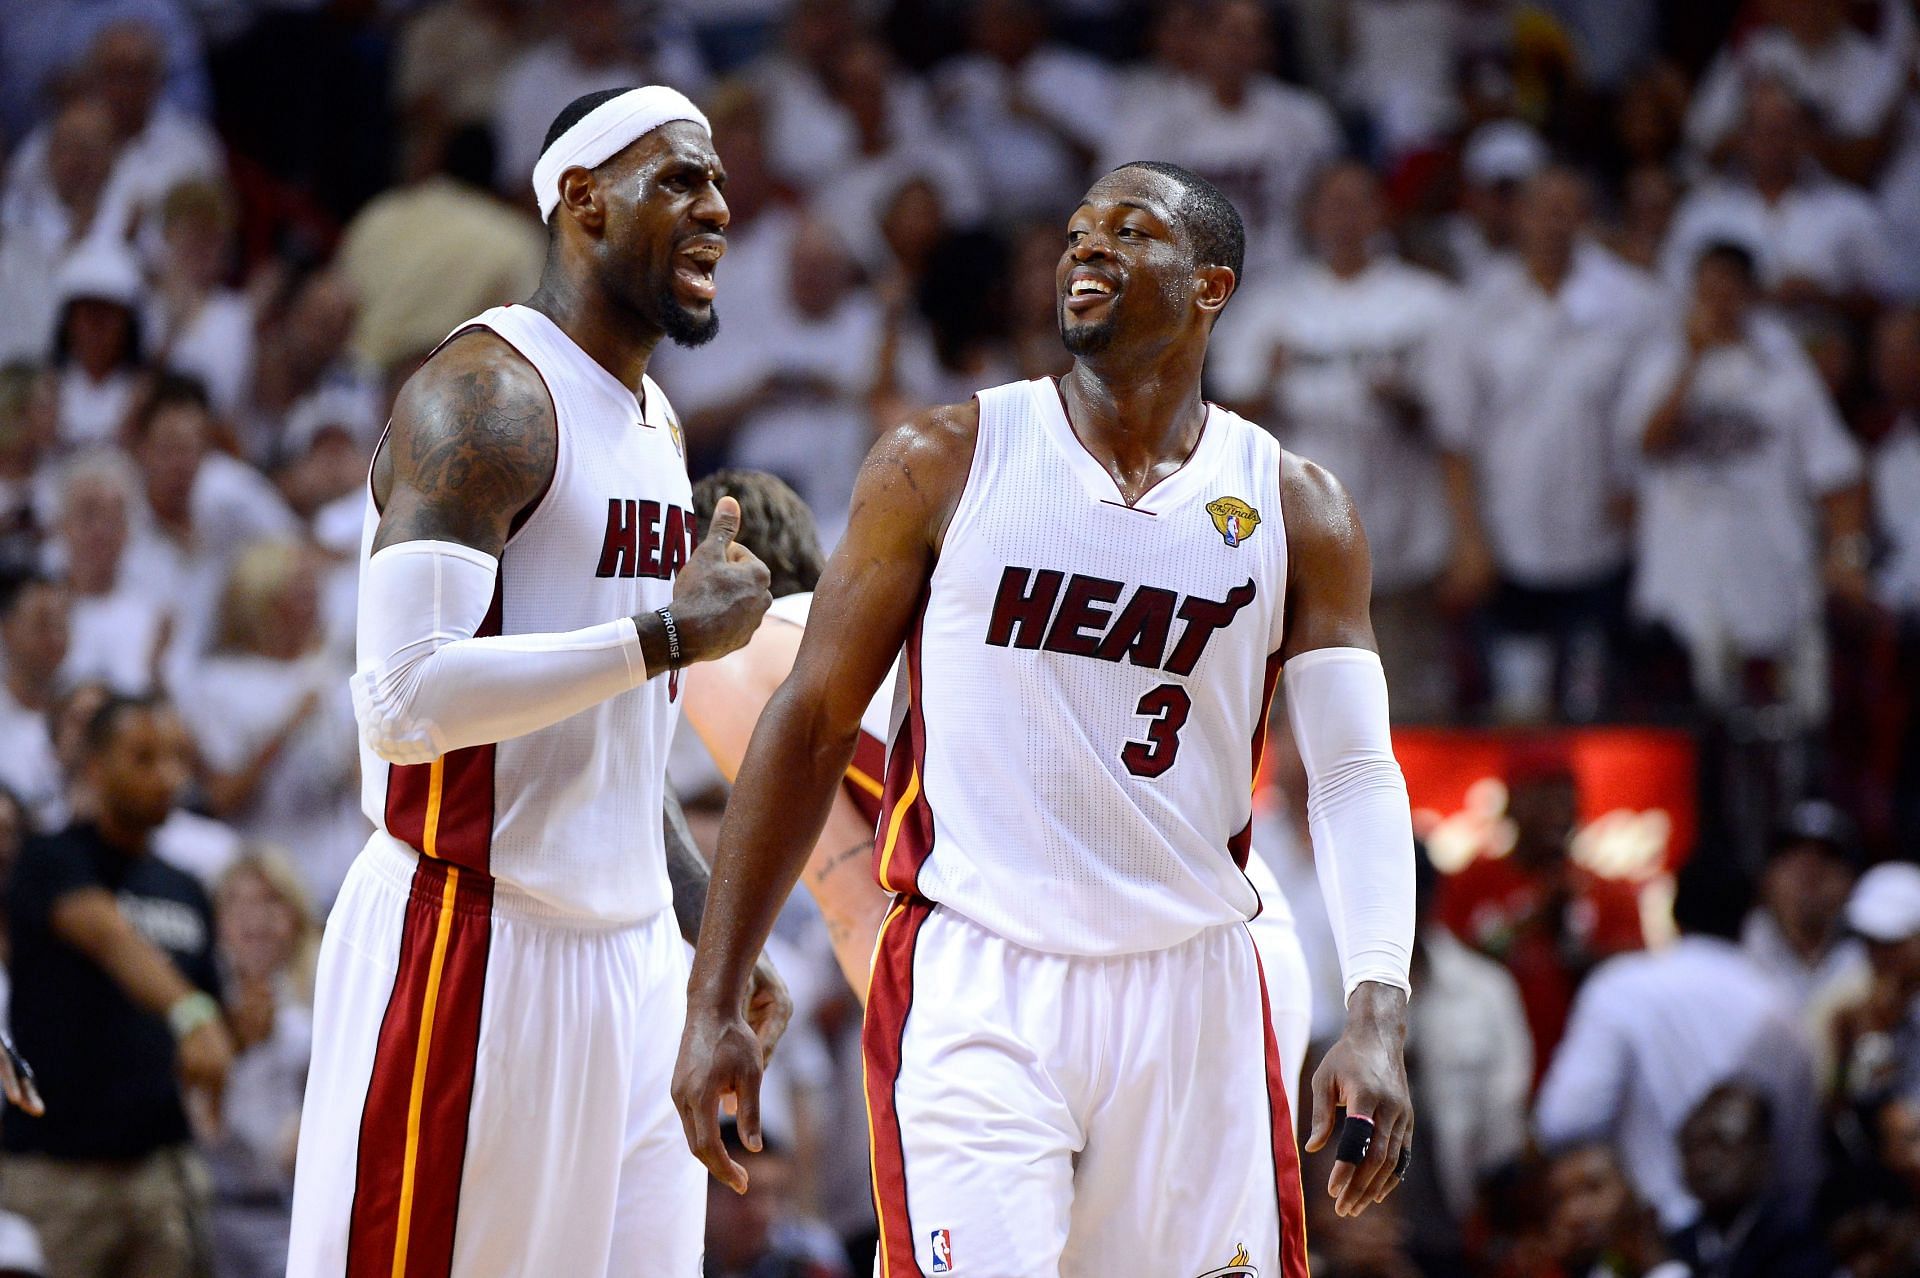 LeBron James and Dwyane Wade for the Miami Heat